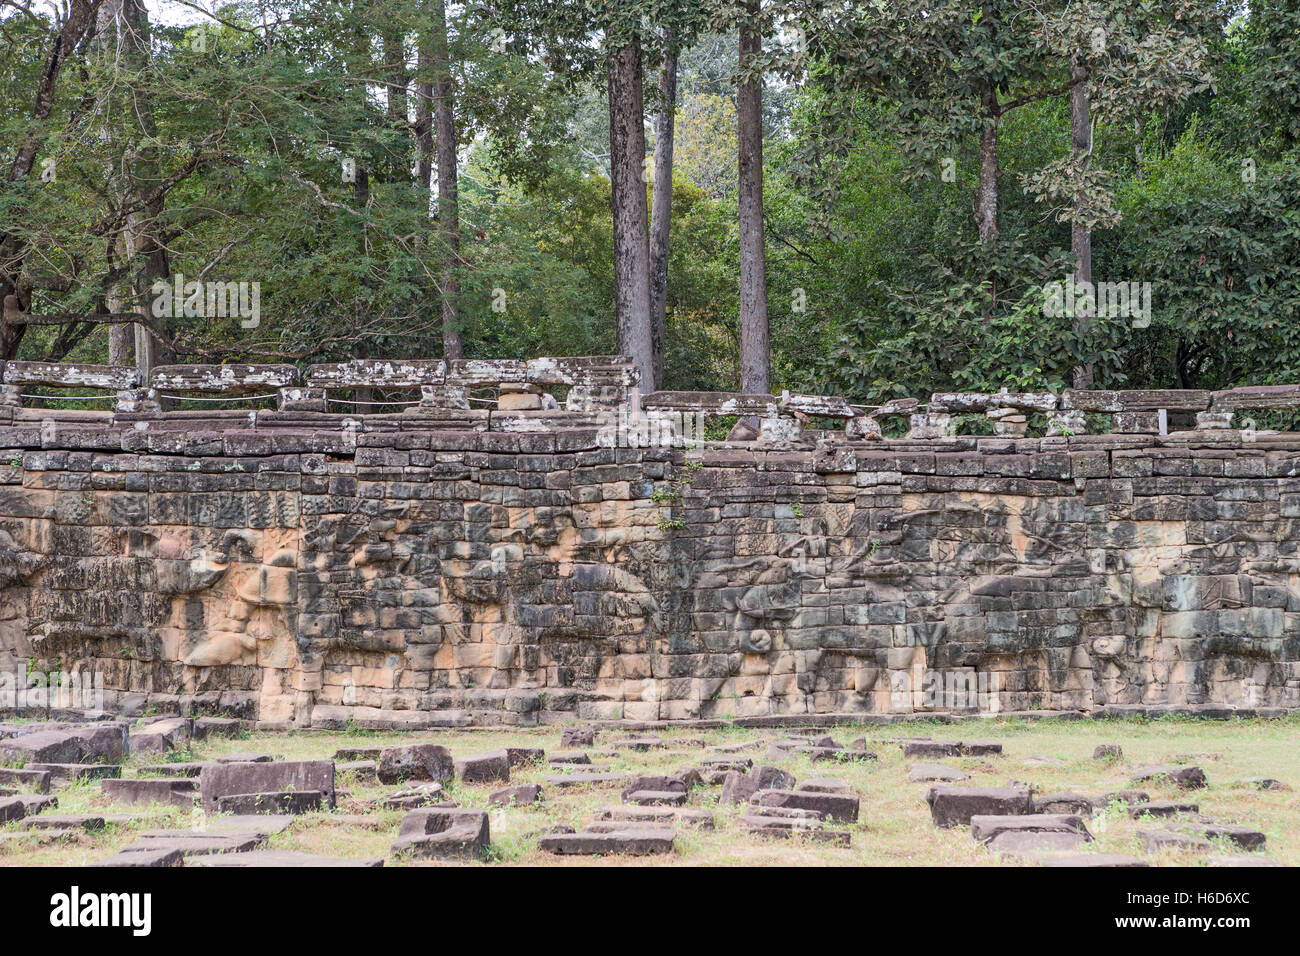 Elephant Terrace bas-relief hunting scenes, Bayon complex, Khmer architecture, Angkor Thom, Cambodia Stock Photo